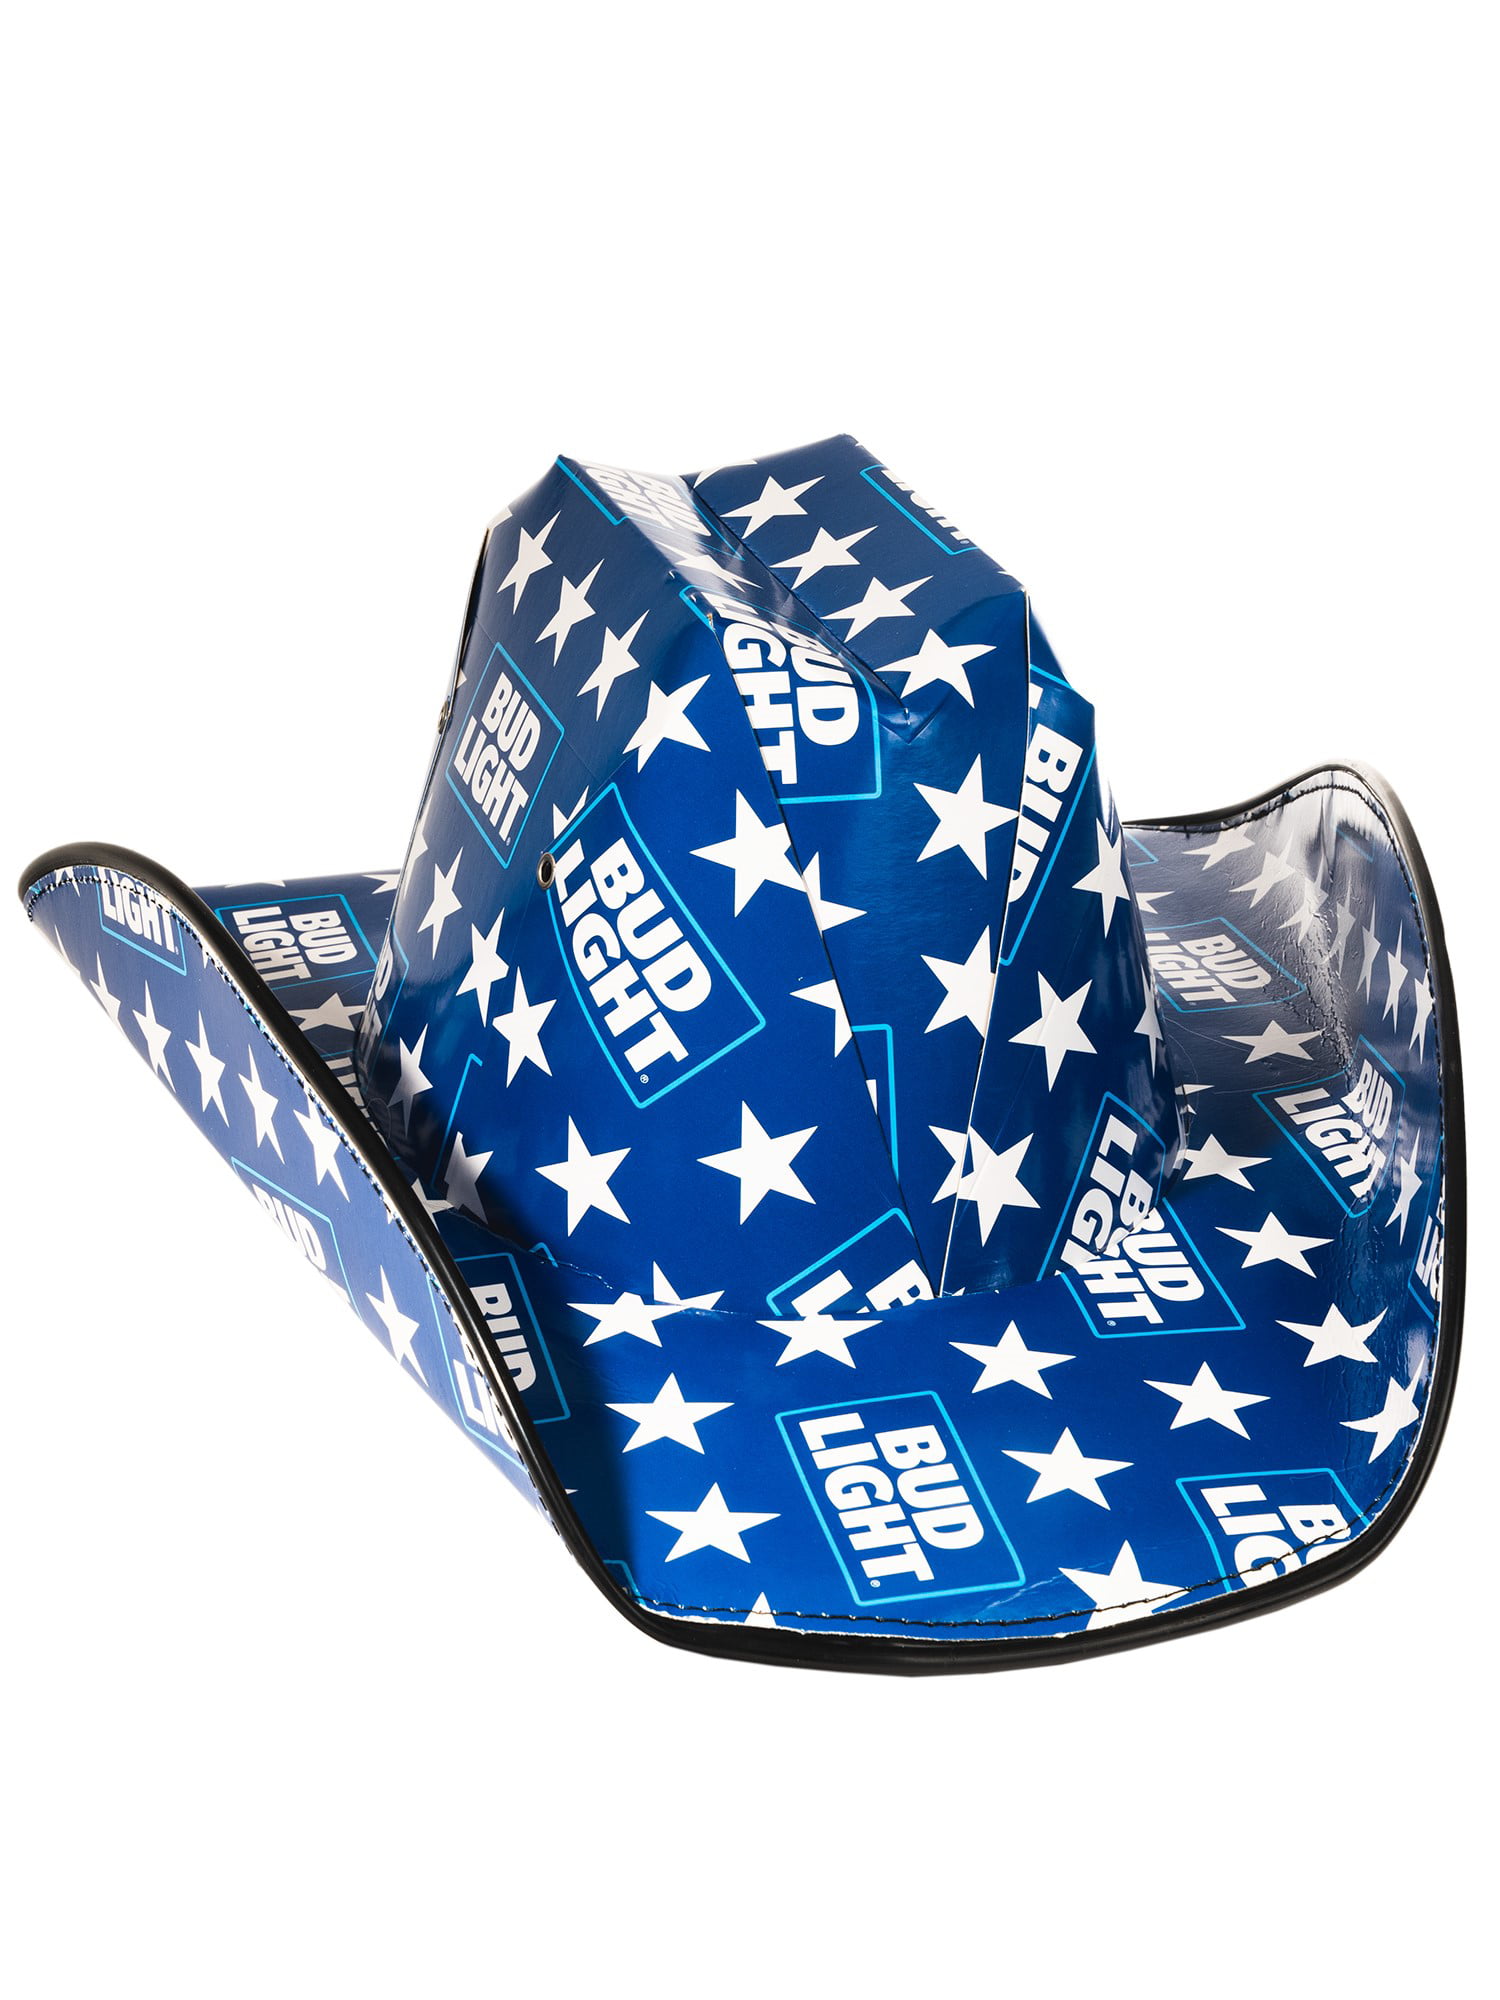 Bud Light Cowboy Cowgirl Hat Beer Box Cardboard Novelty Red White Blue-NEW 